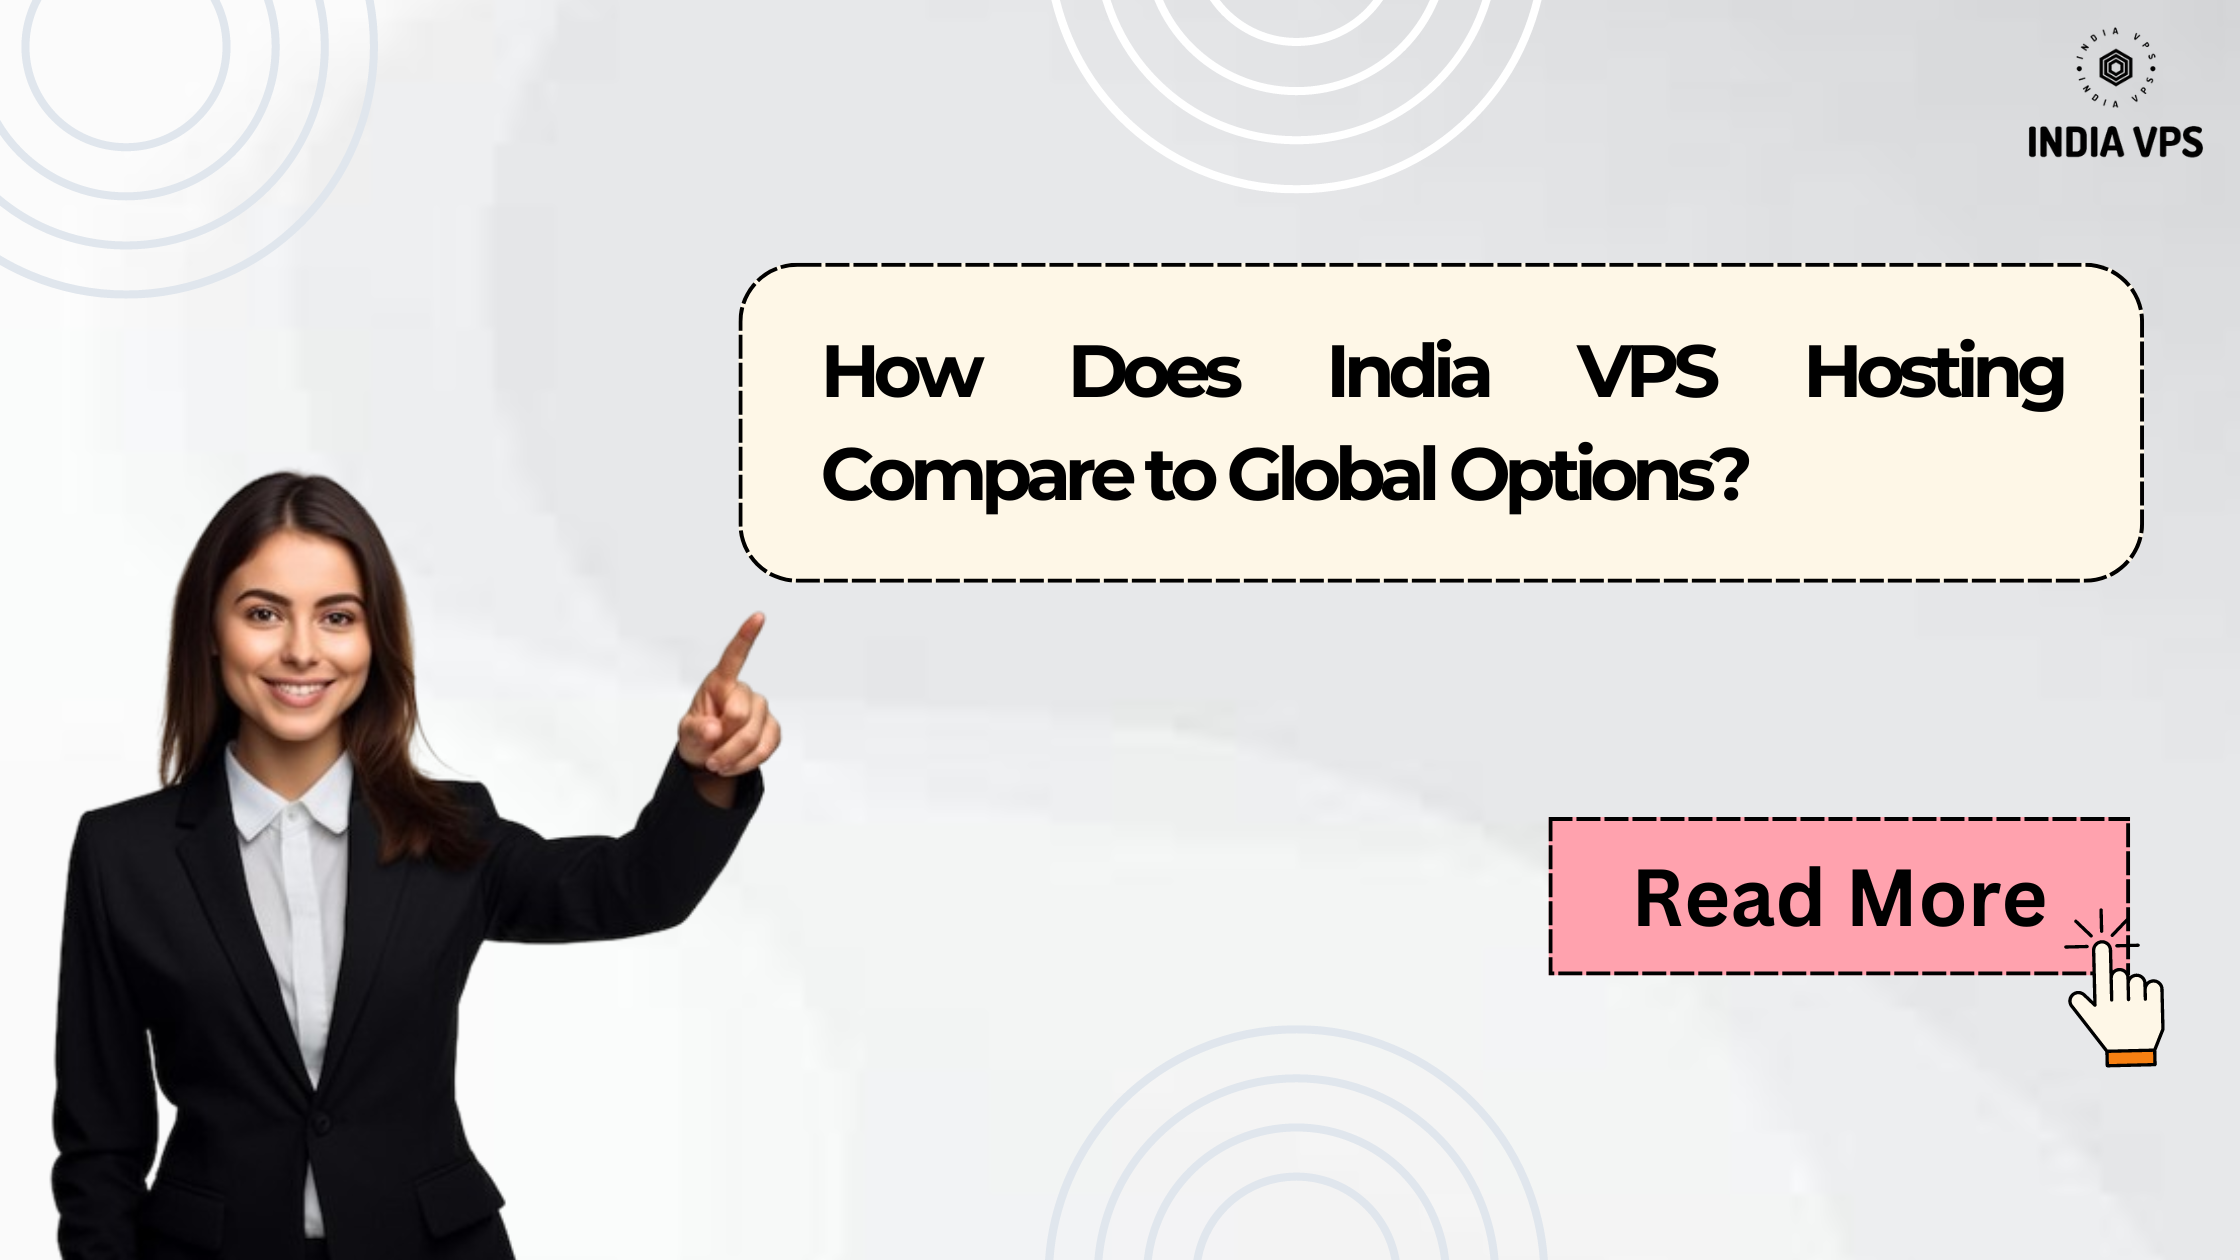 How Does India VPS Hosting Compare to Global Options?